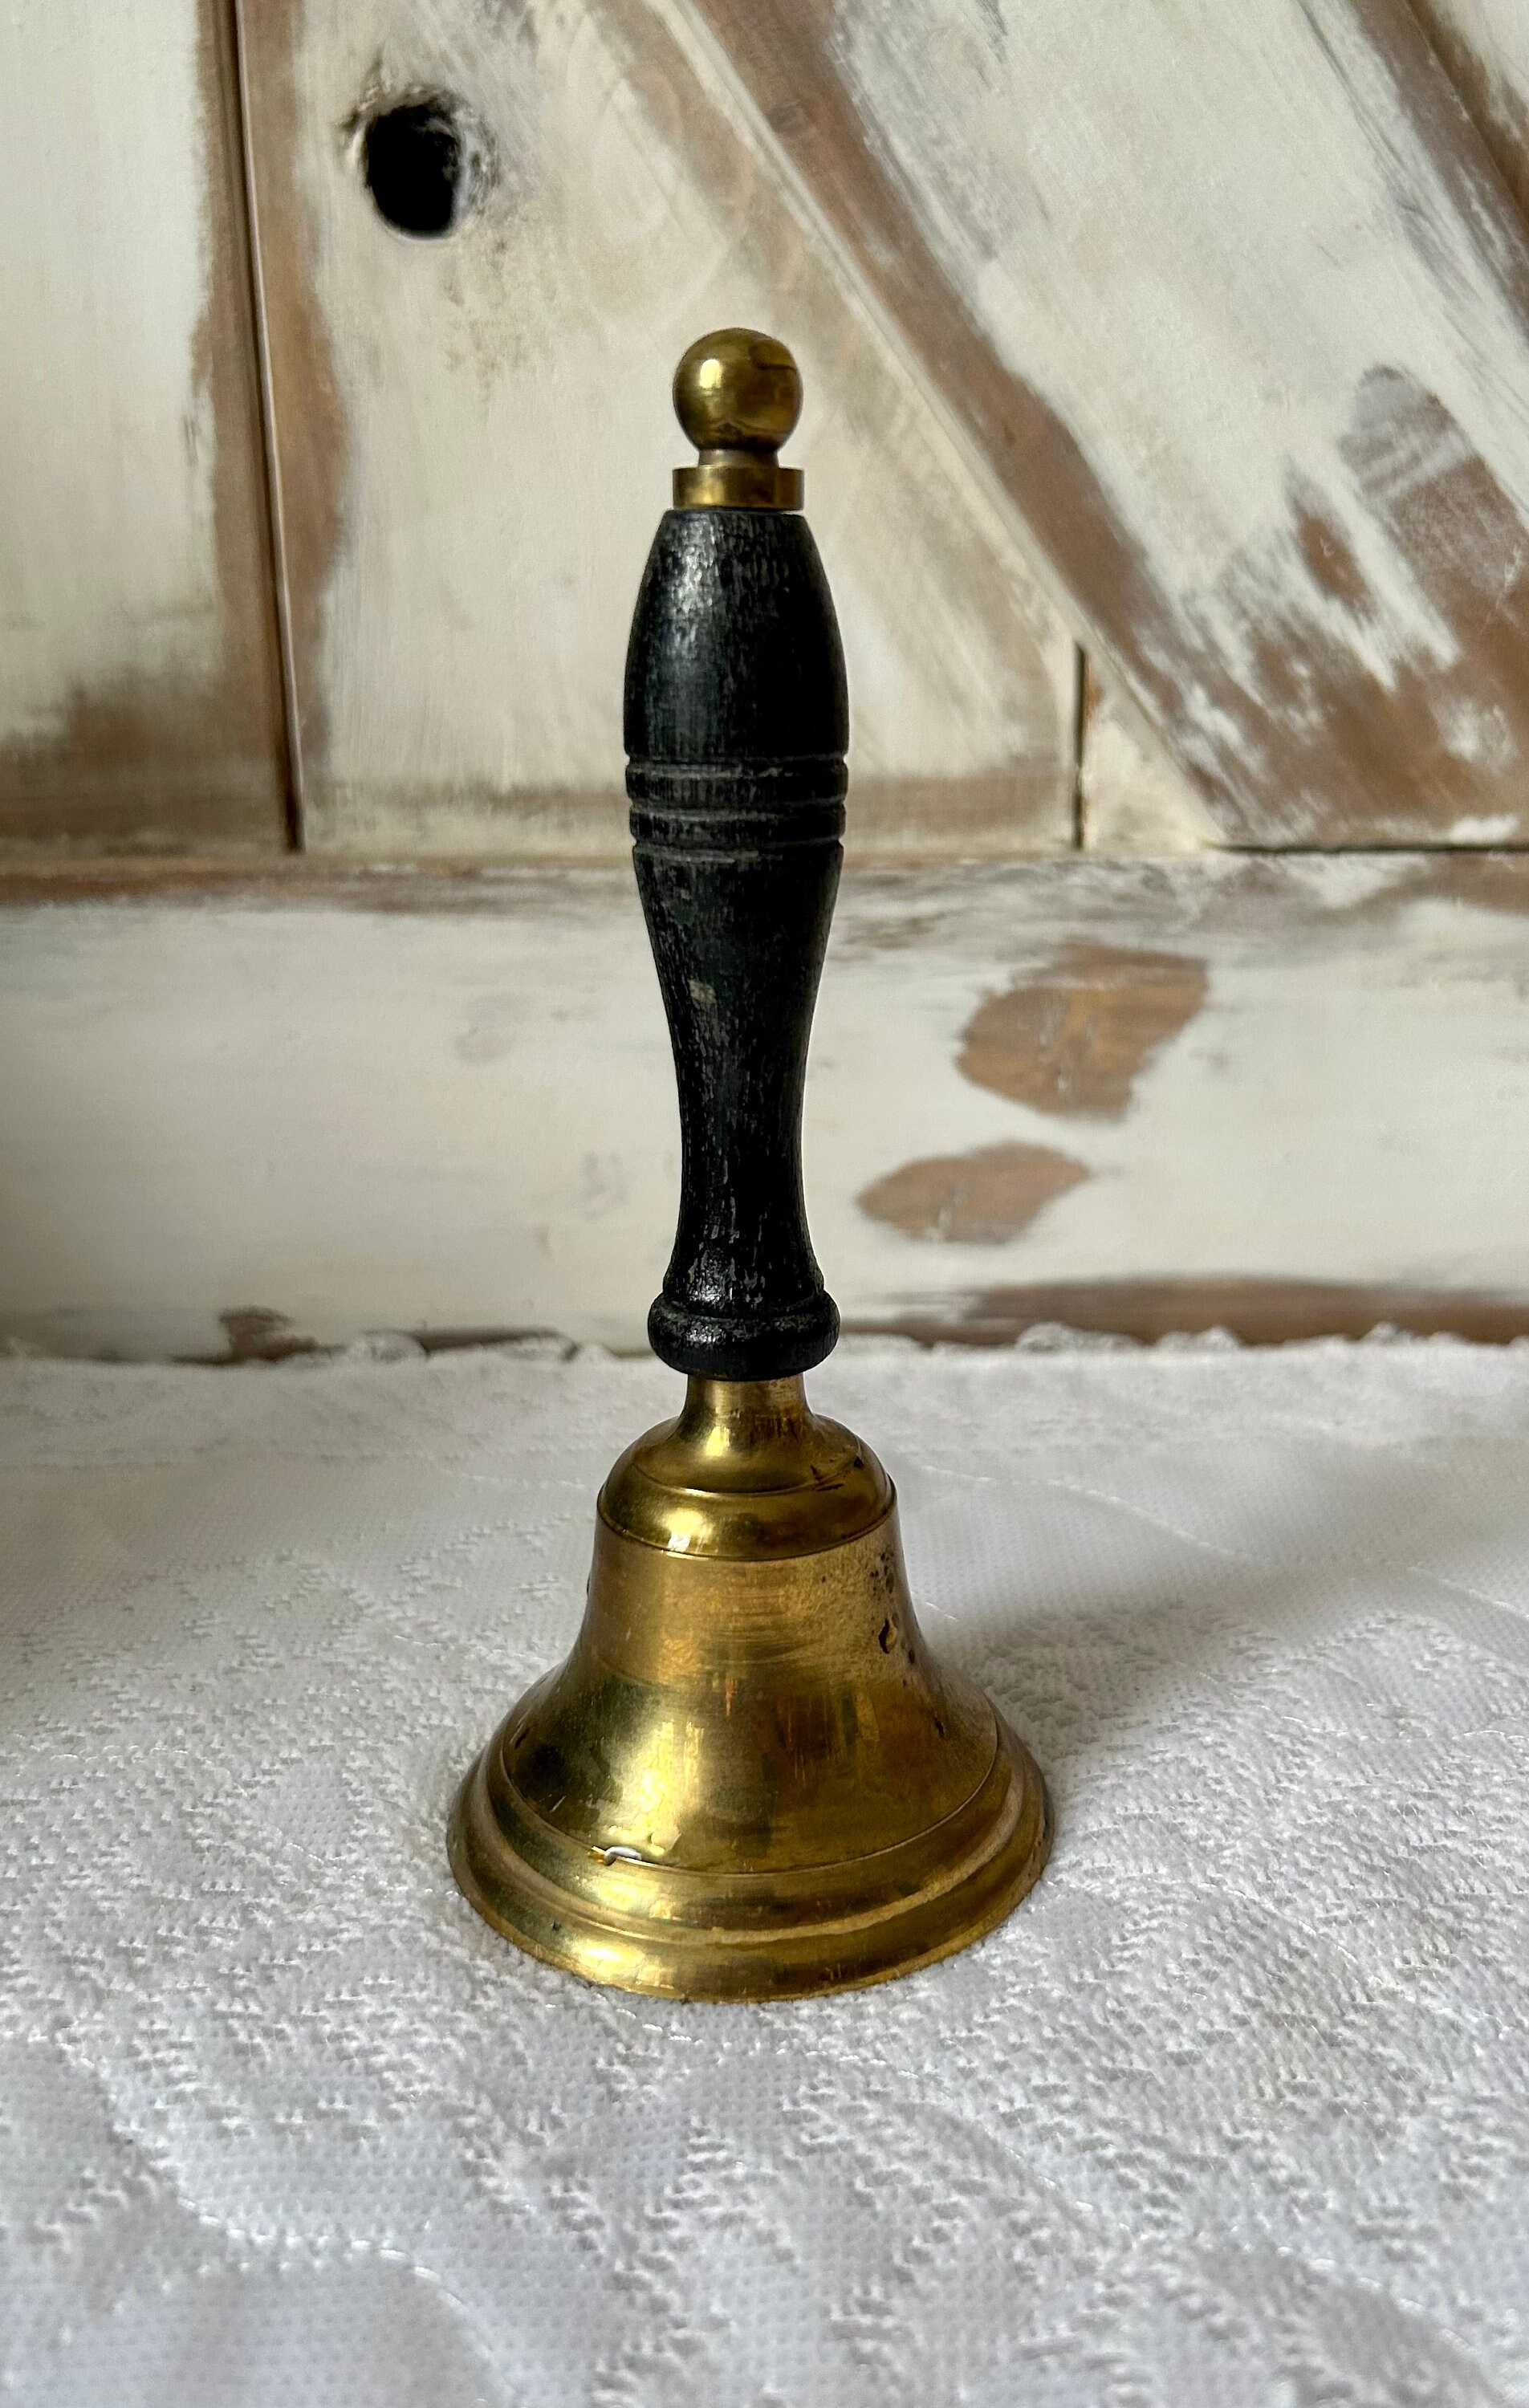 Brass Bell Small Clear Toned Heavyweight for Ritual, Ceremony